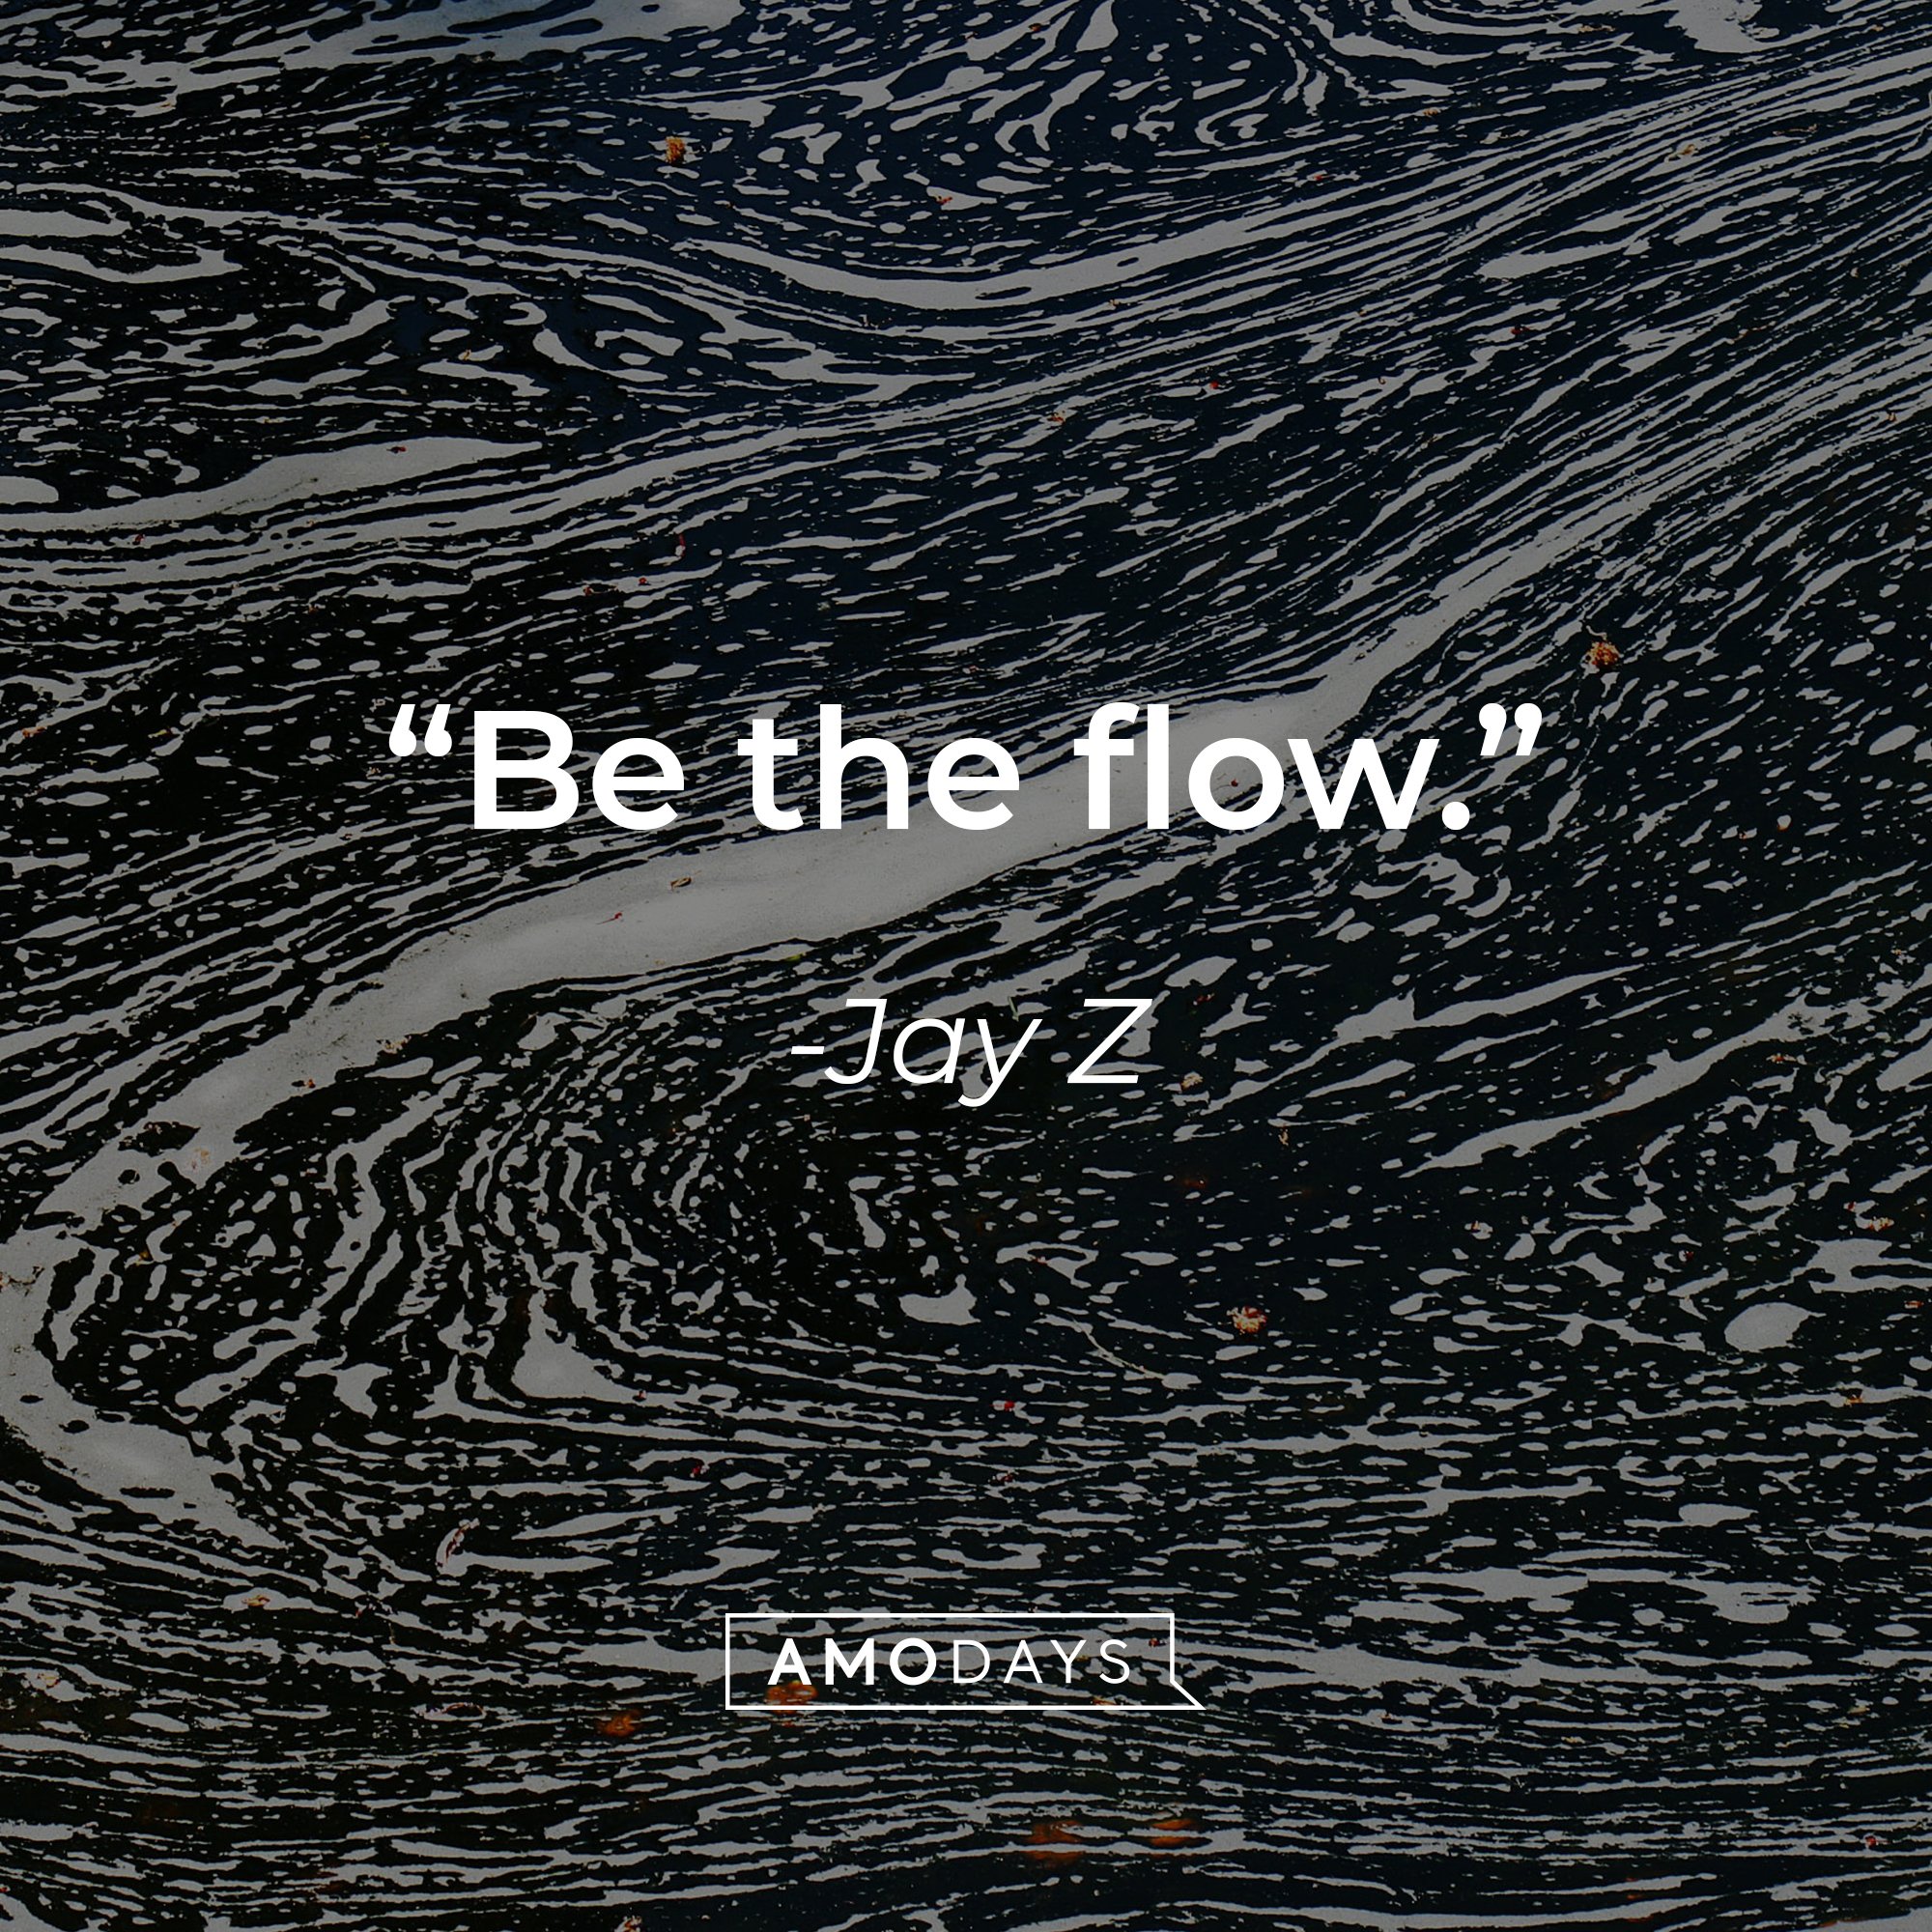 Jay Z's quote: "Be the flow." | Image: AmoDays